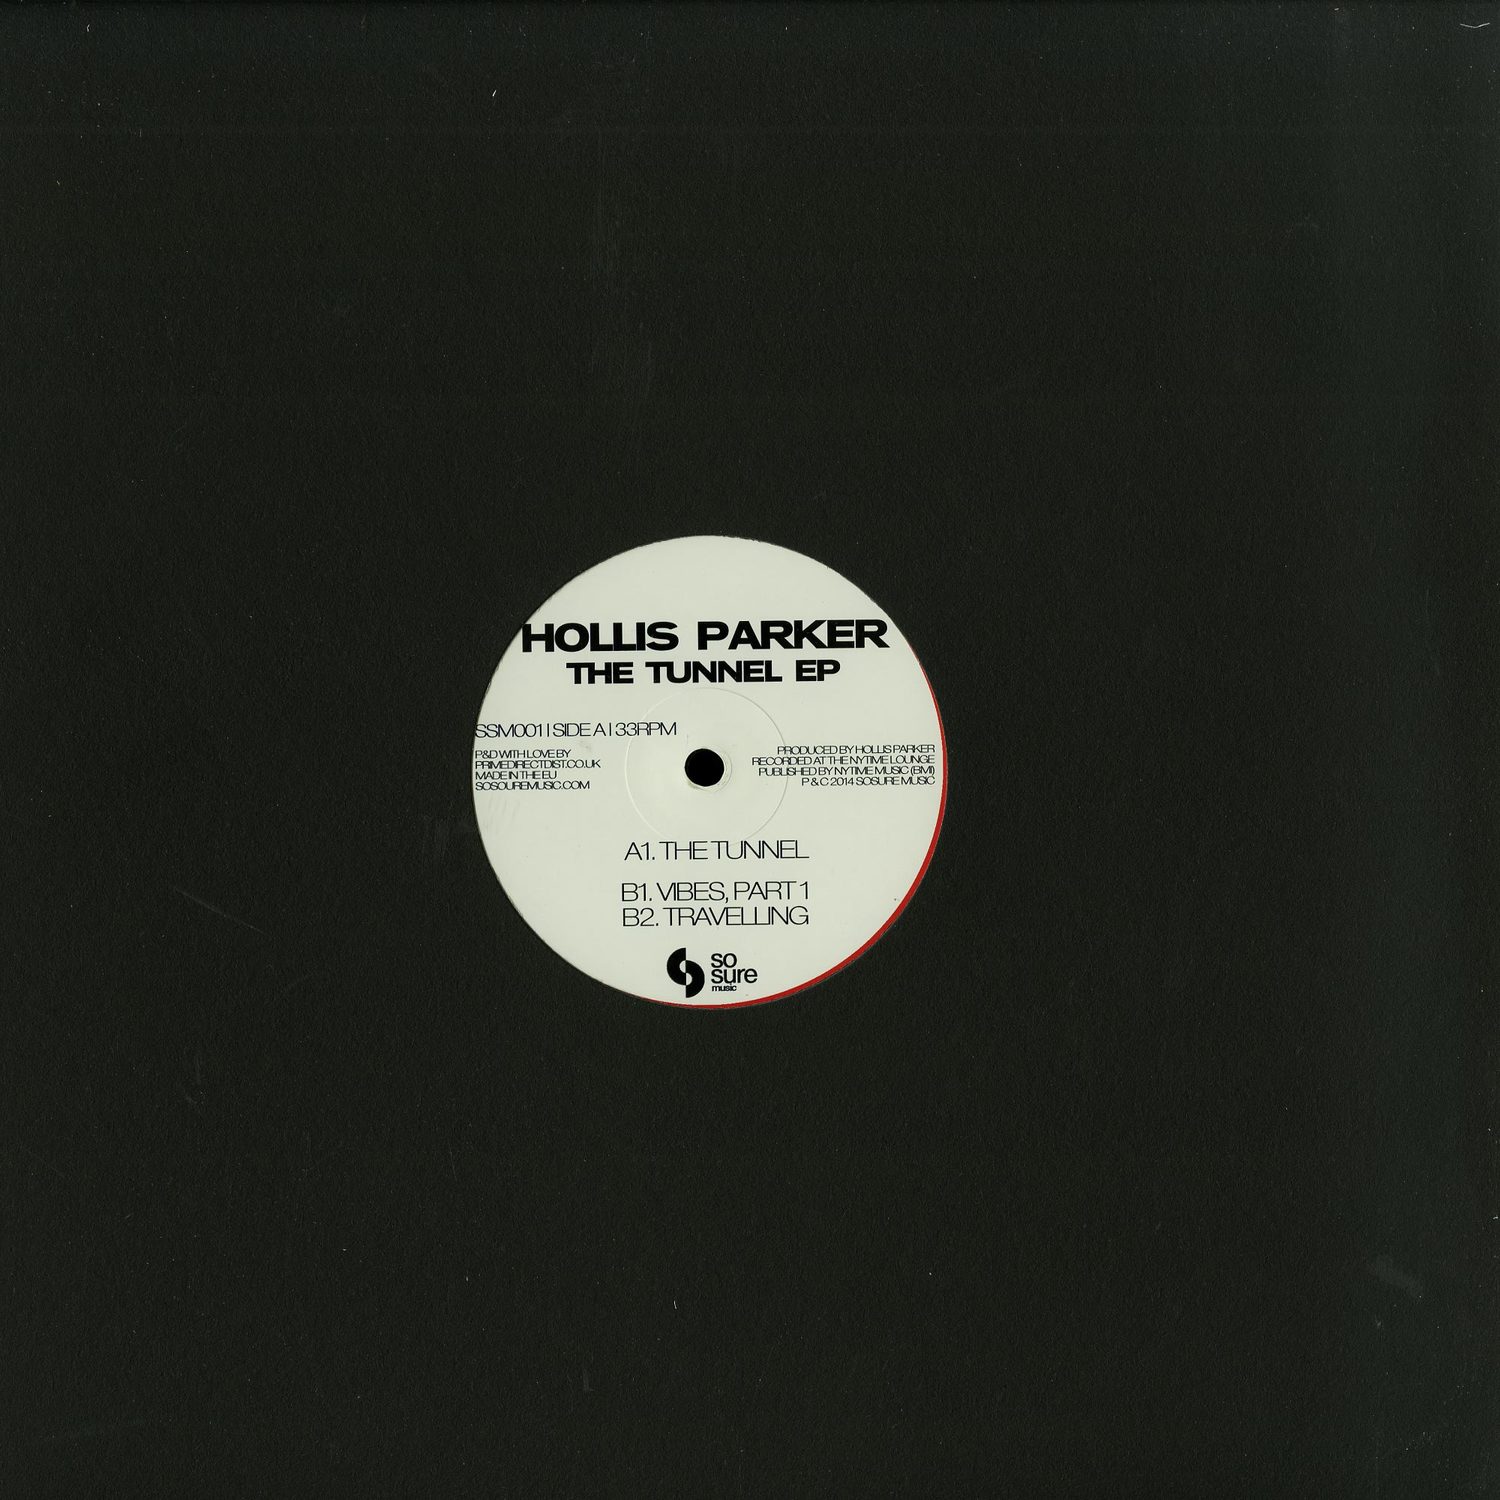 Hollis Parker - THE TUNNEL EP